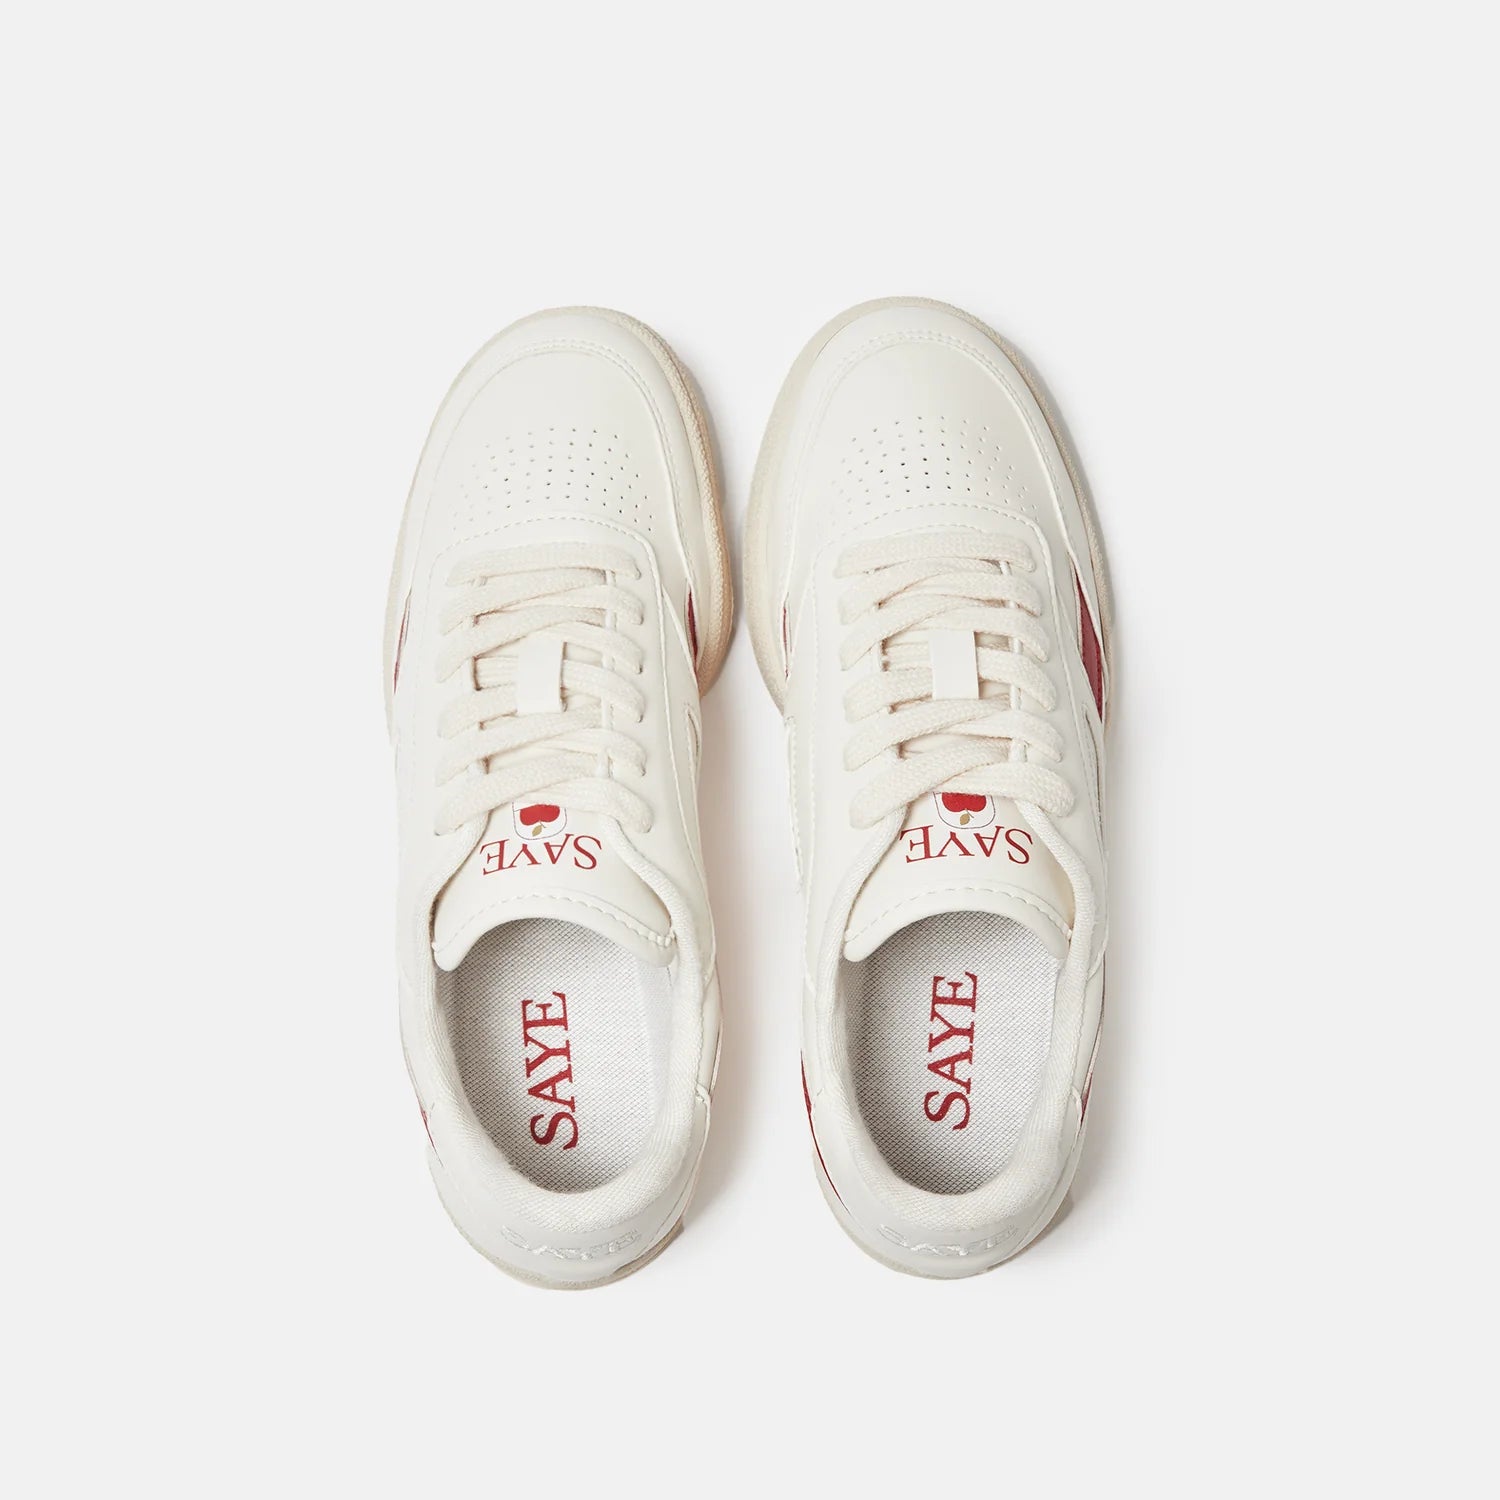 A pair of white Modelo '89 sneakers with Apple red letters on them. Brand Name: SAYE